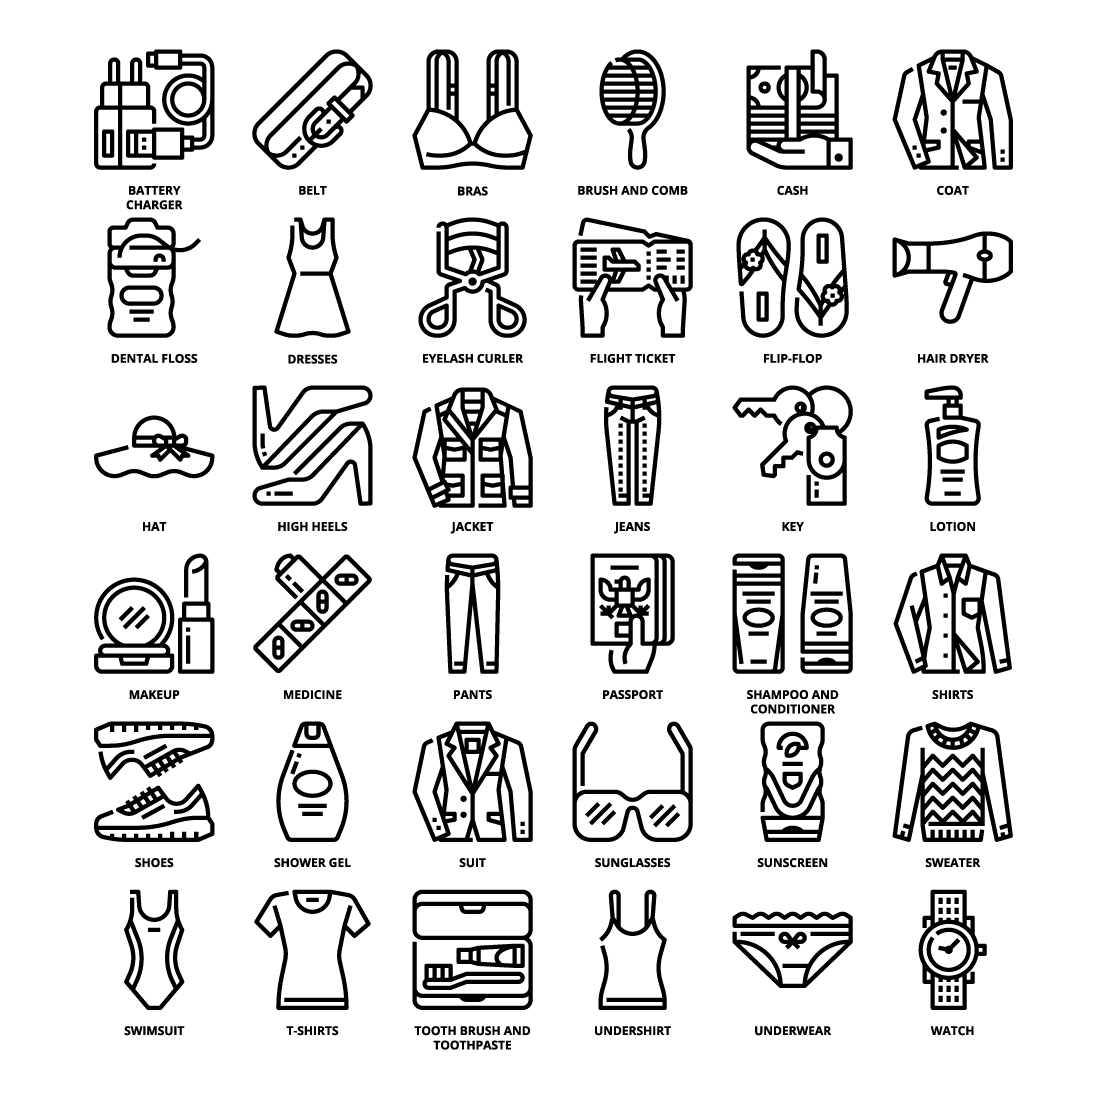 36 Women Travel Packing List Icons Set x 4 Styles pinterest preview image.